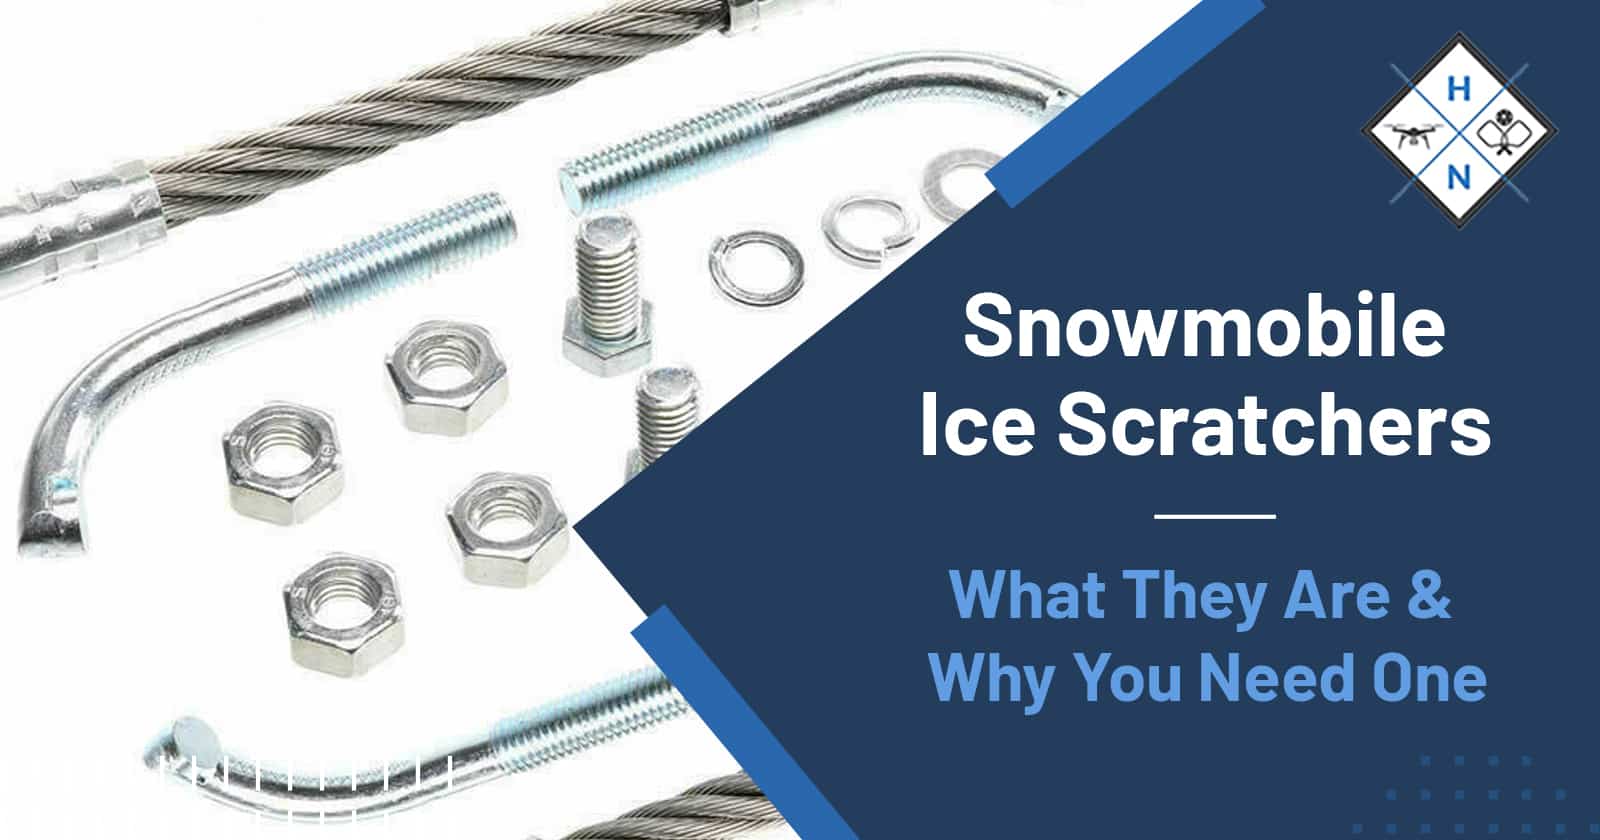 Snowmobile Ice Scratchers – What They Are & Why You Need One